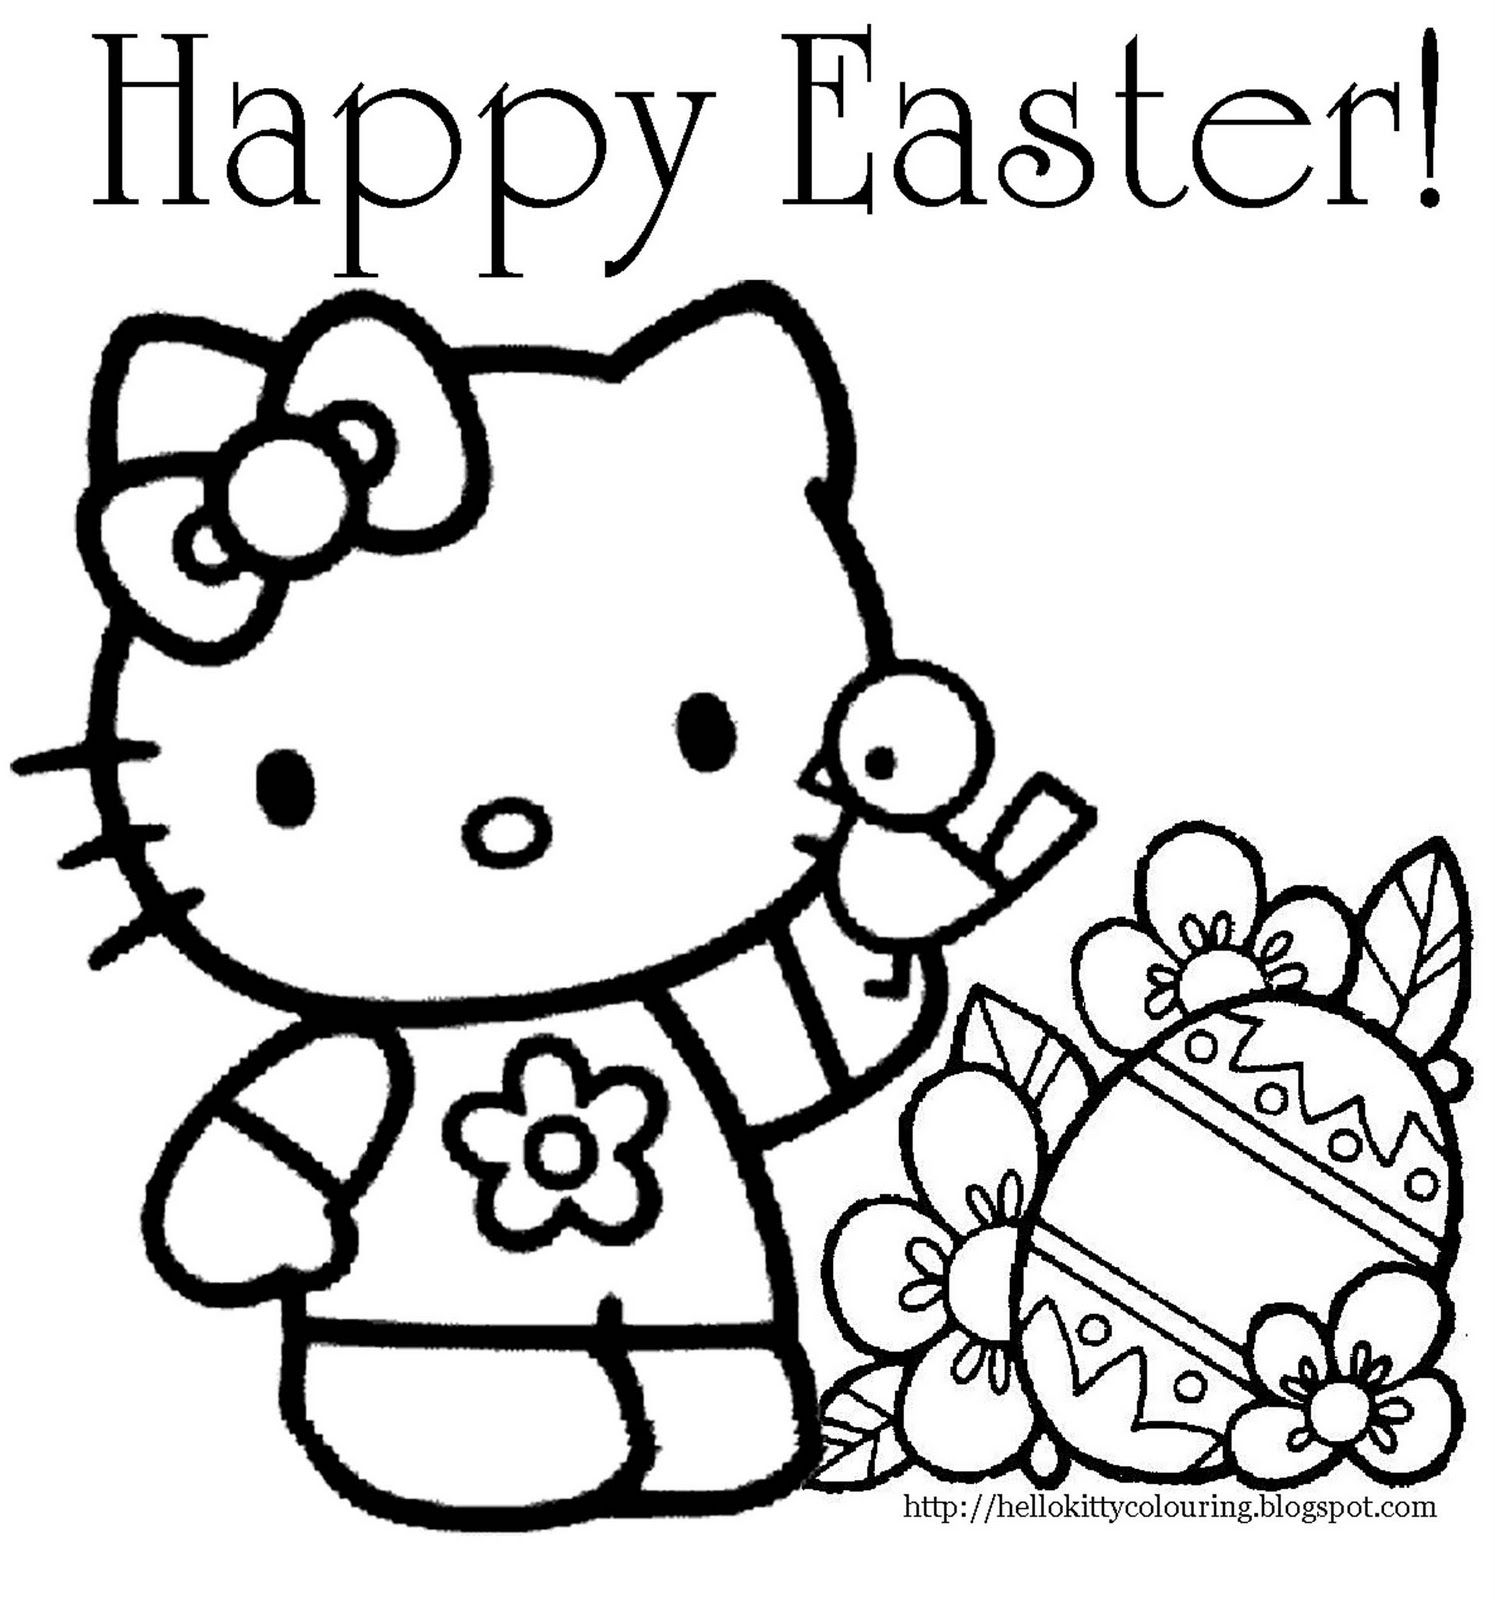 full page easter egg coloring pages - Clip Art Library